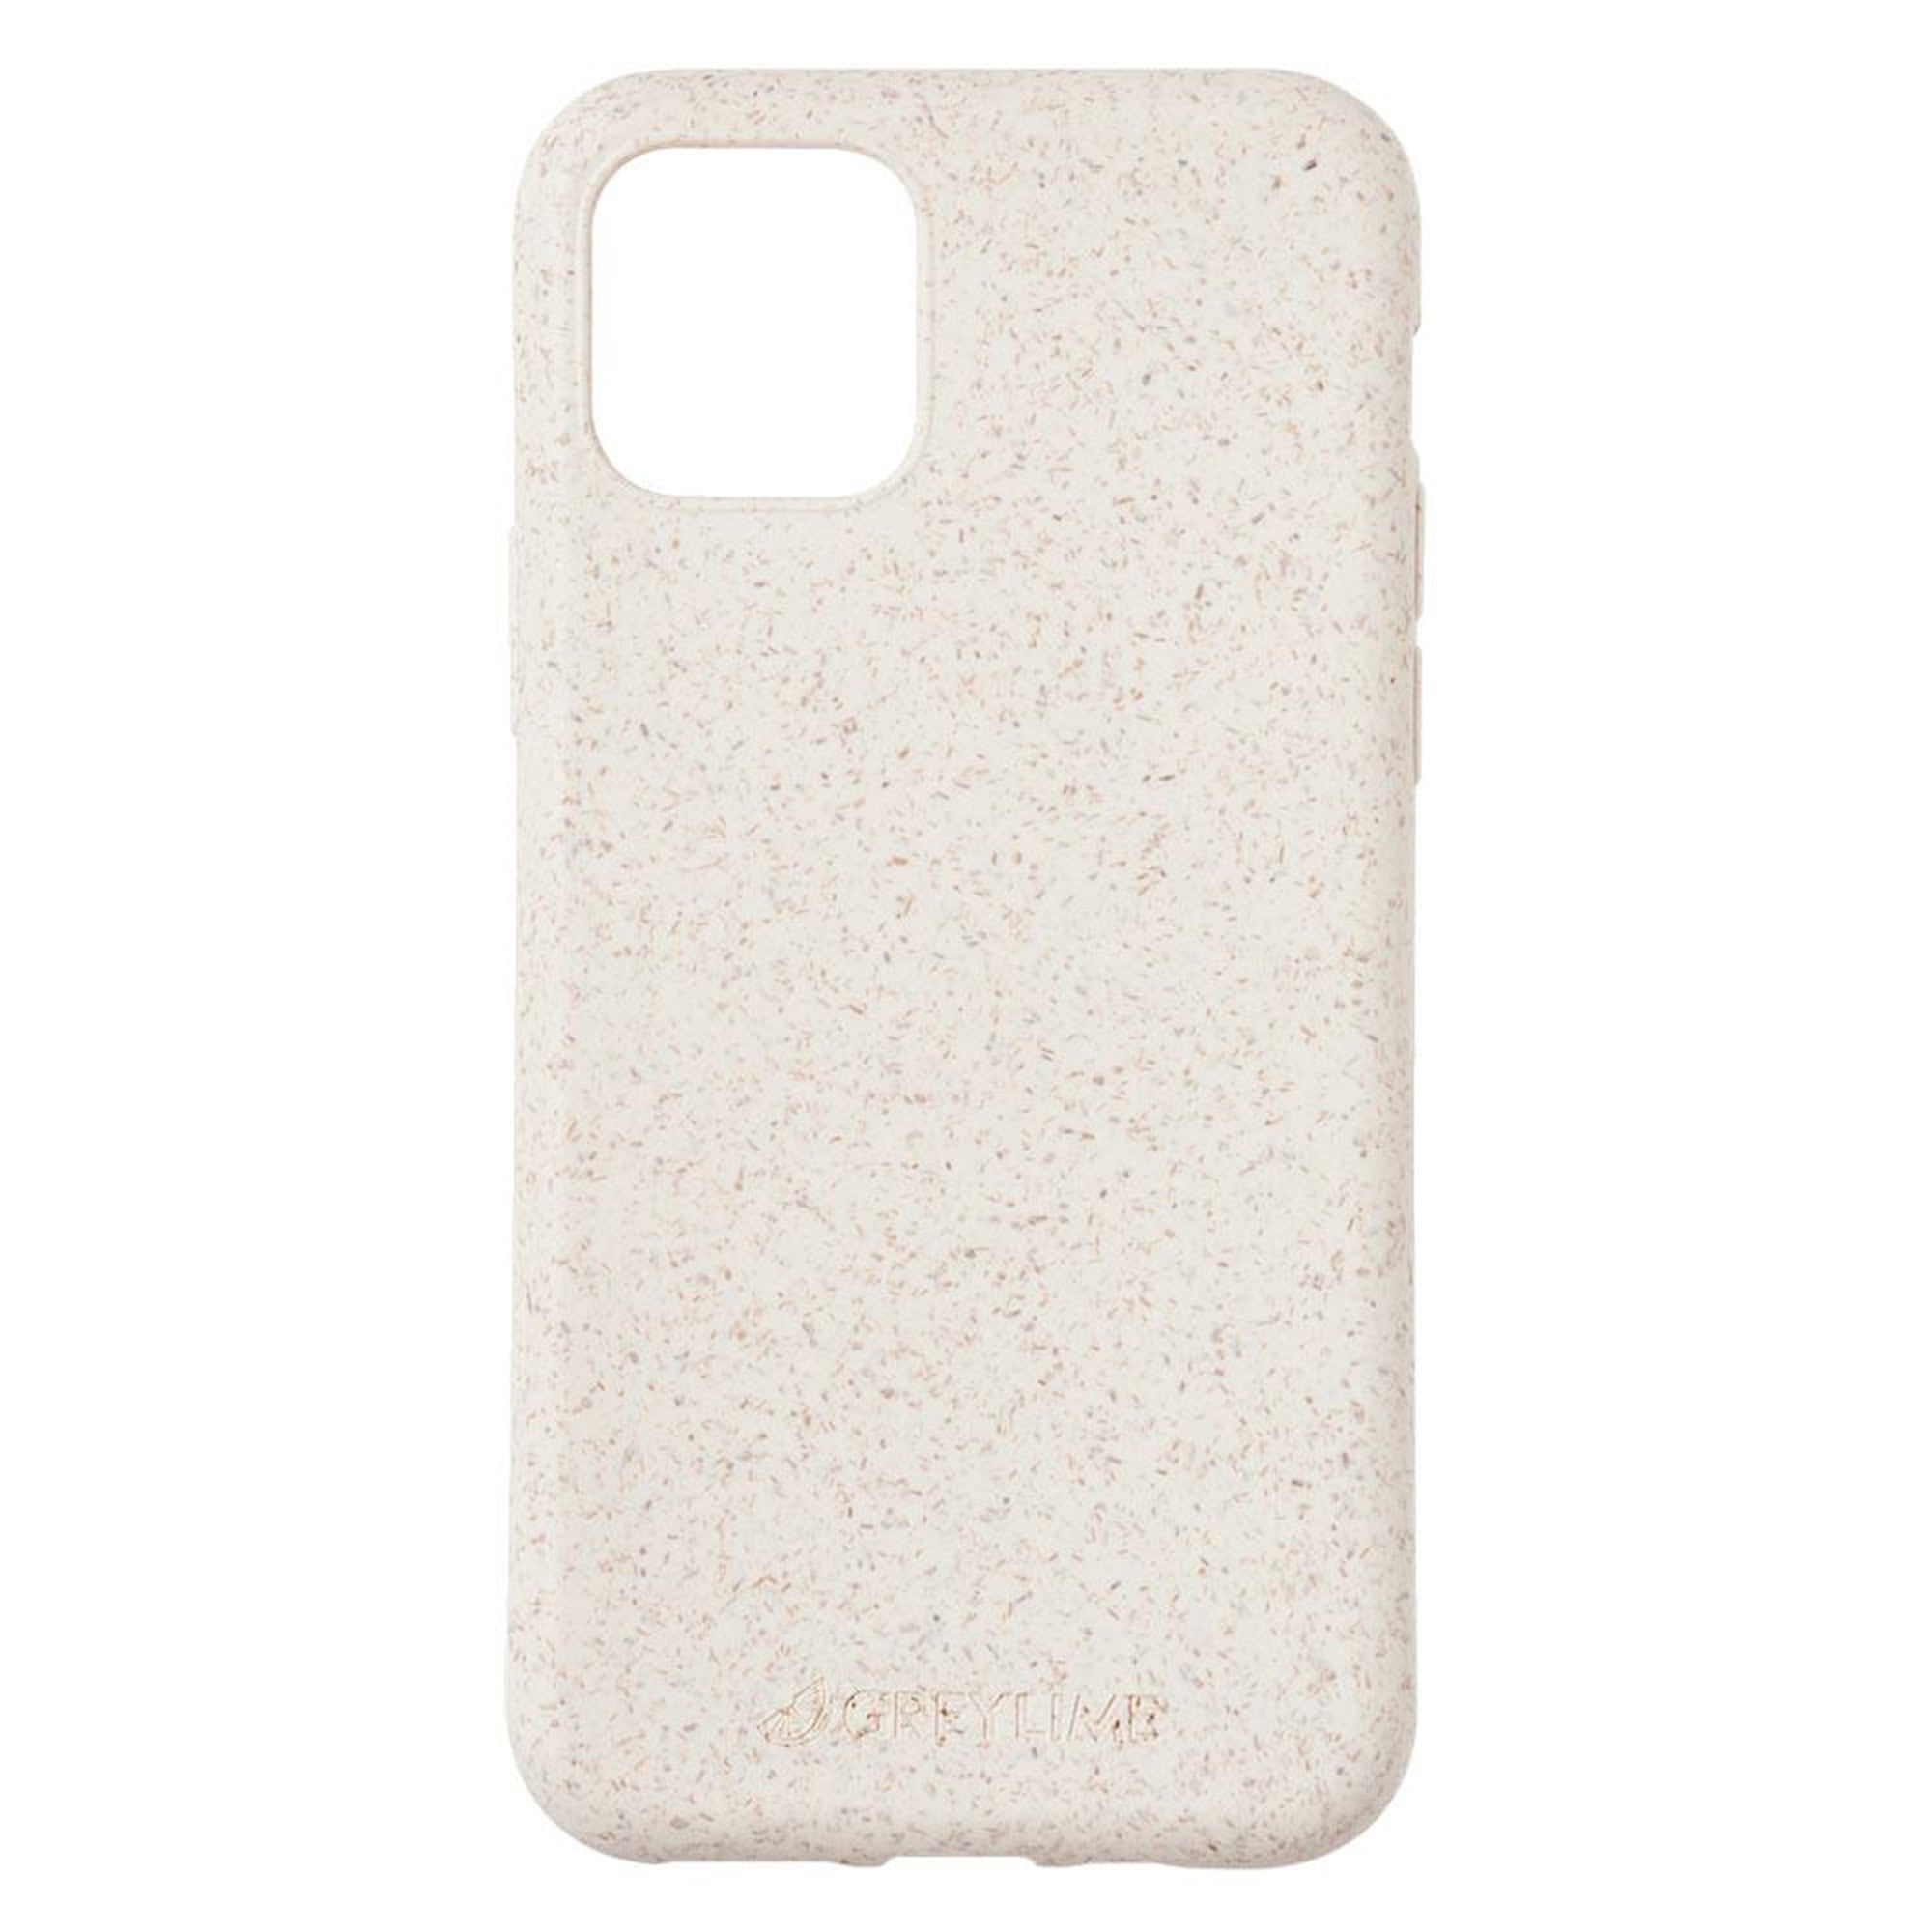 GreyLime-iPhone-11-Pro-Max-biodegradable-cover-Beige-COIP11PM02-V4.jpg